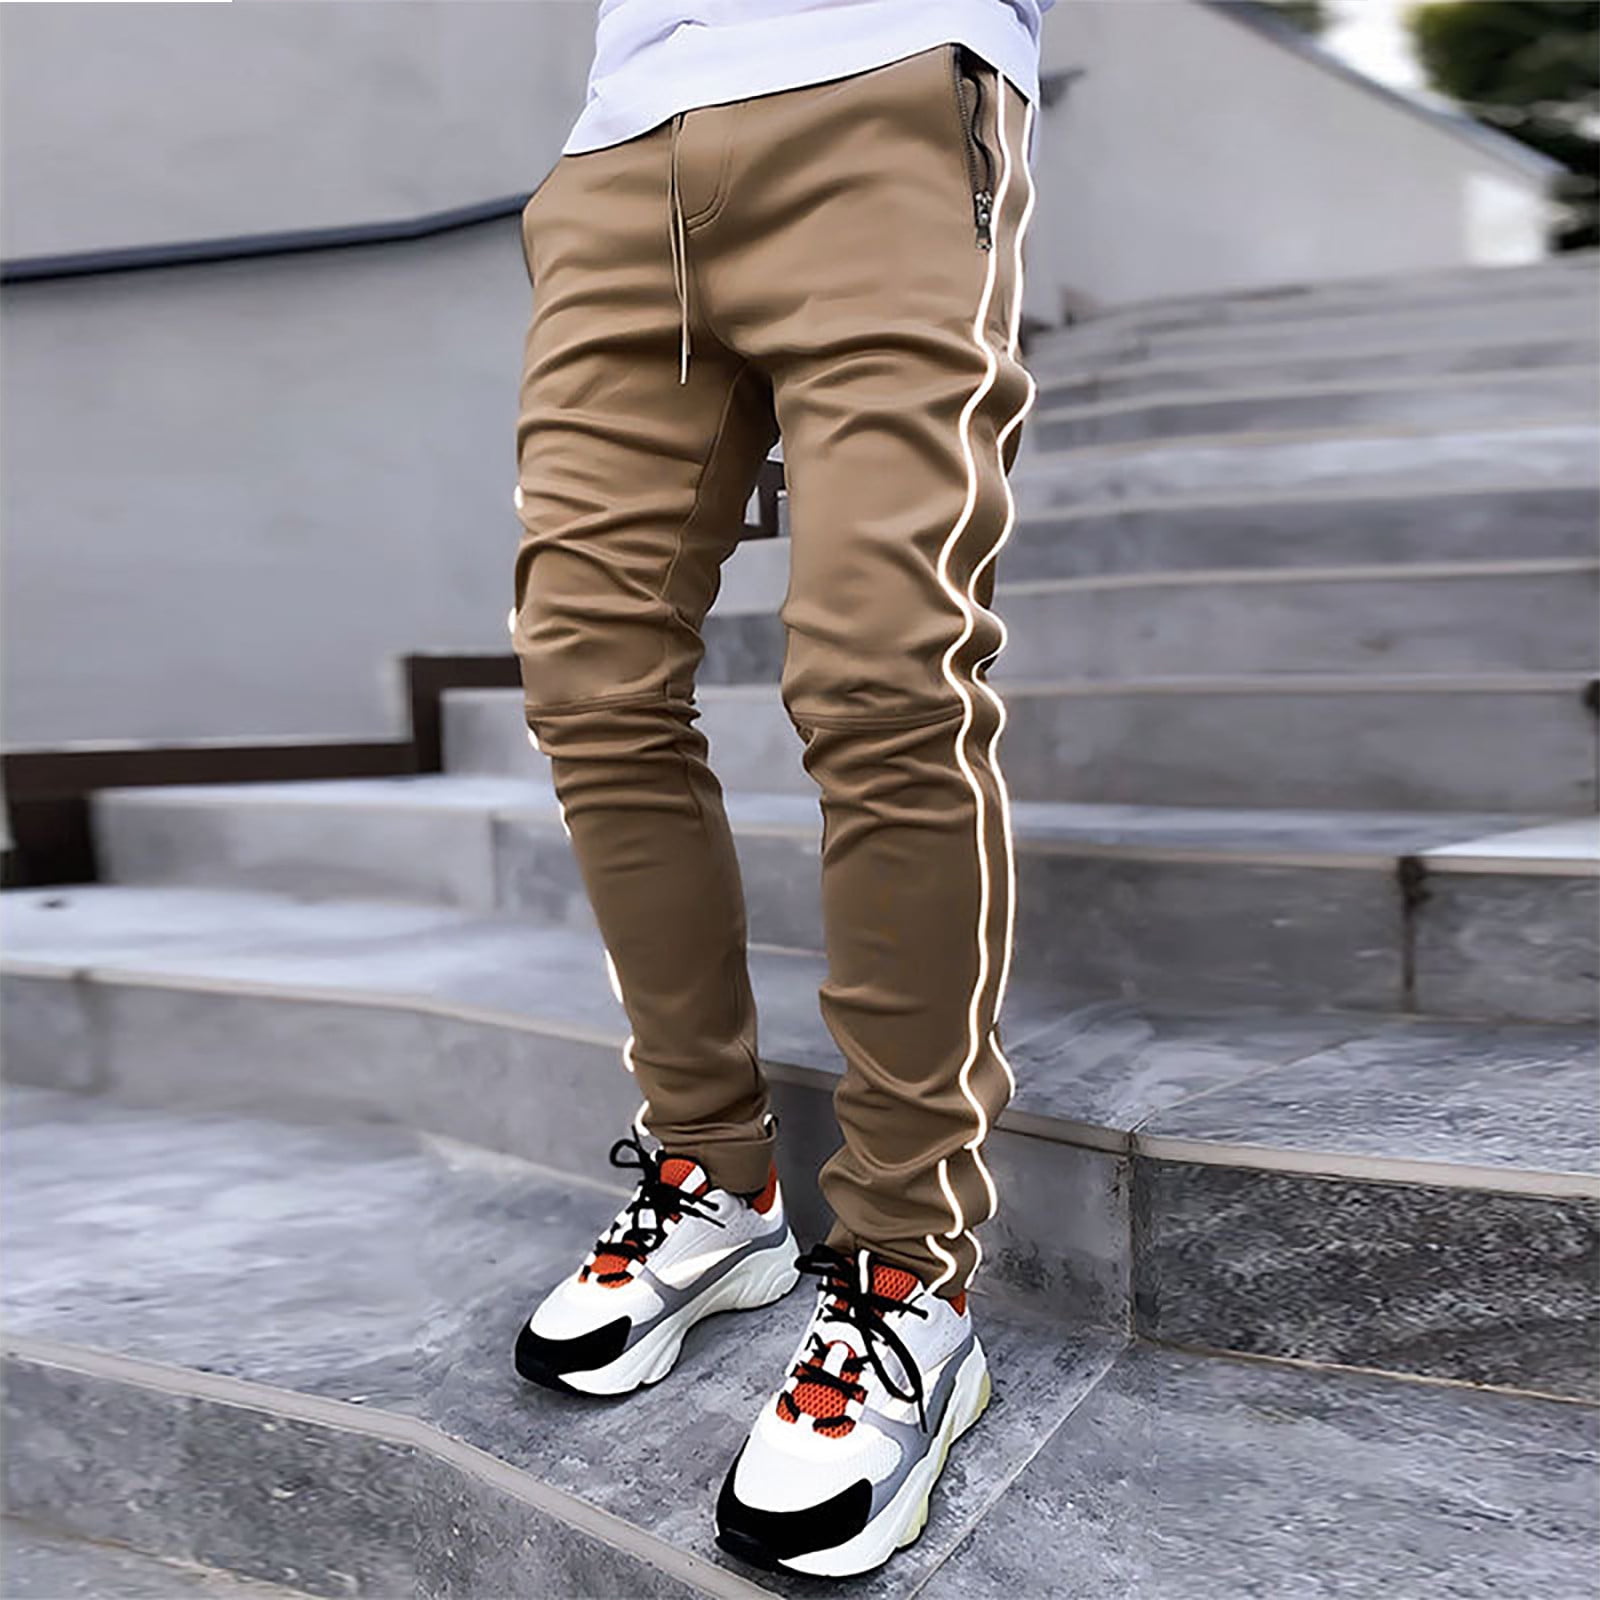 Mens Elastic Waist Frankie Shop Cargo Pants With Big Pocket Wide Leg  Joggers For Streetwear, Spring And Autumn Oversized Baggy Pants For Women  Solid Color From Kong04, $10.09 | DHgate.Com